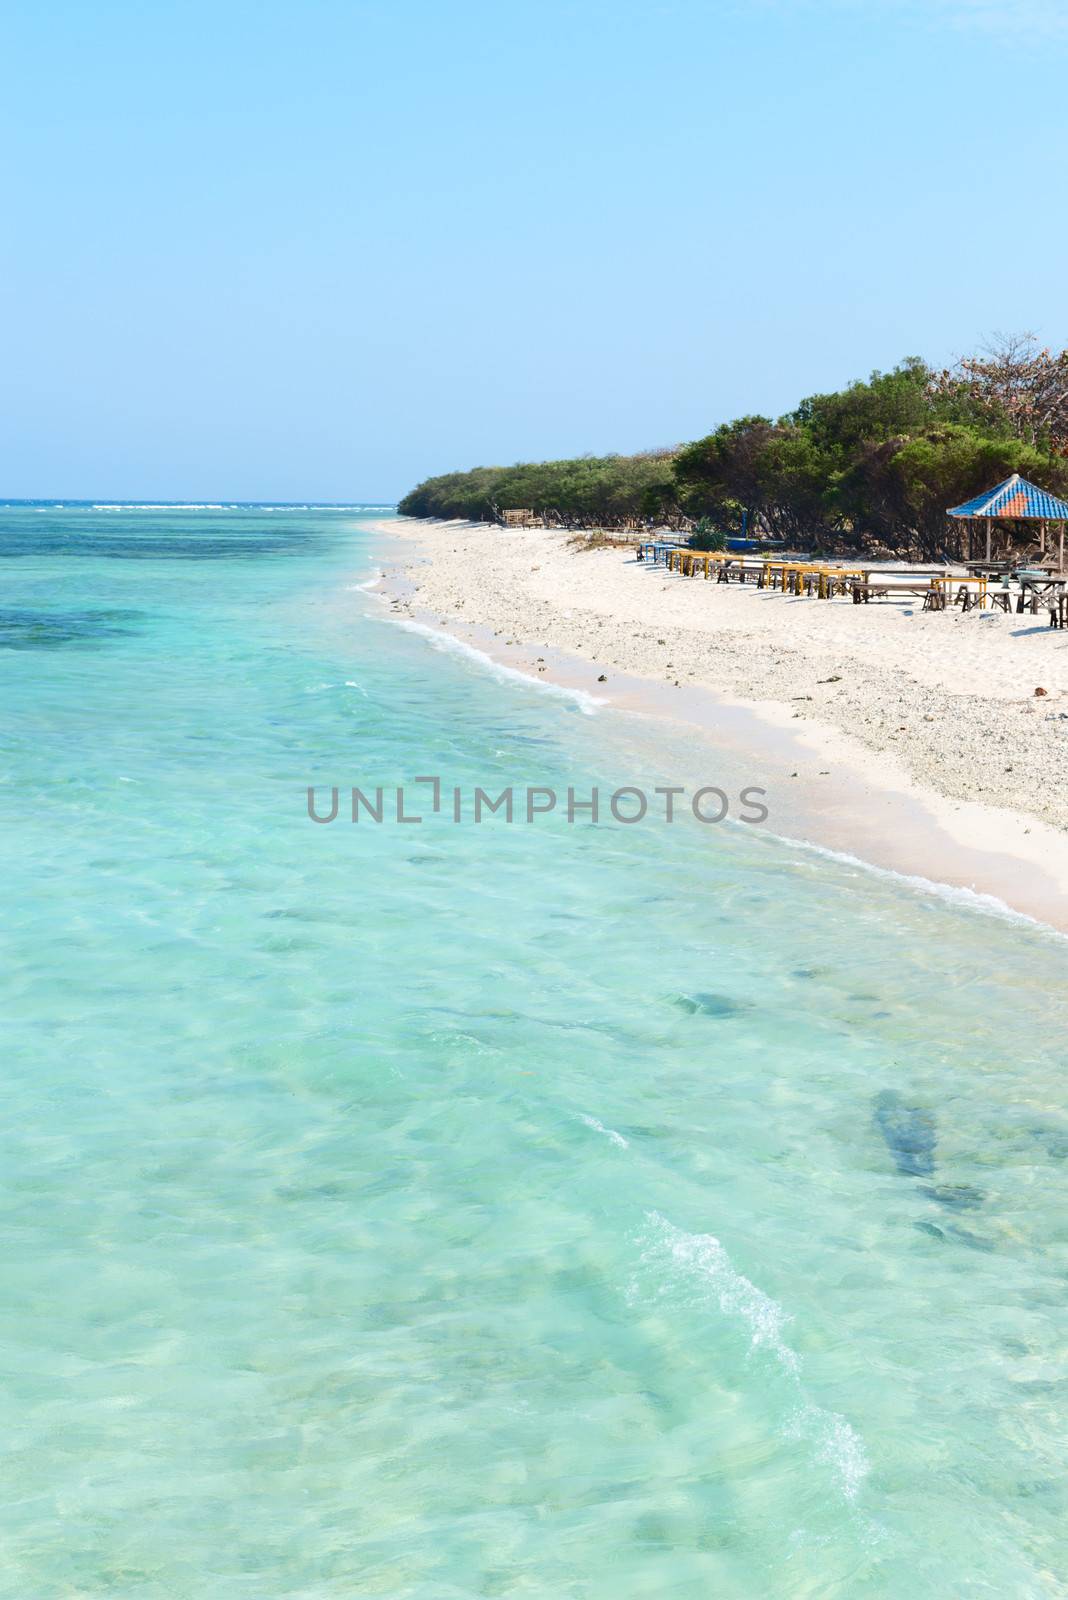 Beautiful beach with blue clean water and seaside cafe on tropical beach. Selective focus on front water.